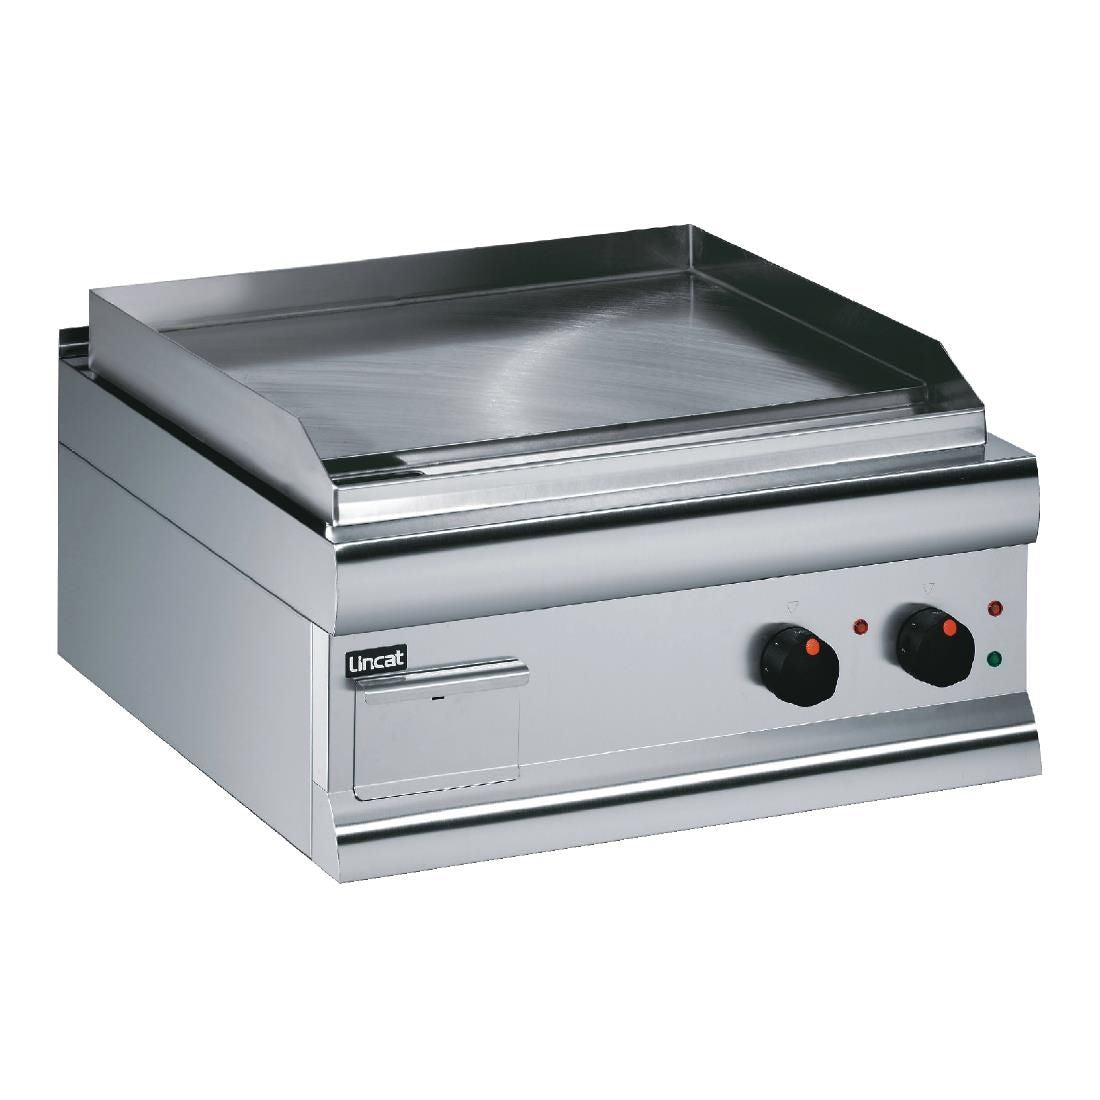 F922 Lincat Silverlink 600 Machined Steel Dual zone Electric Griddle GS6/T JD Catering Equipment Solutions Ltd